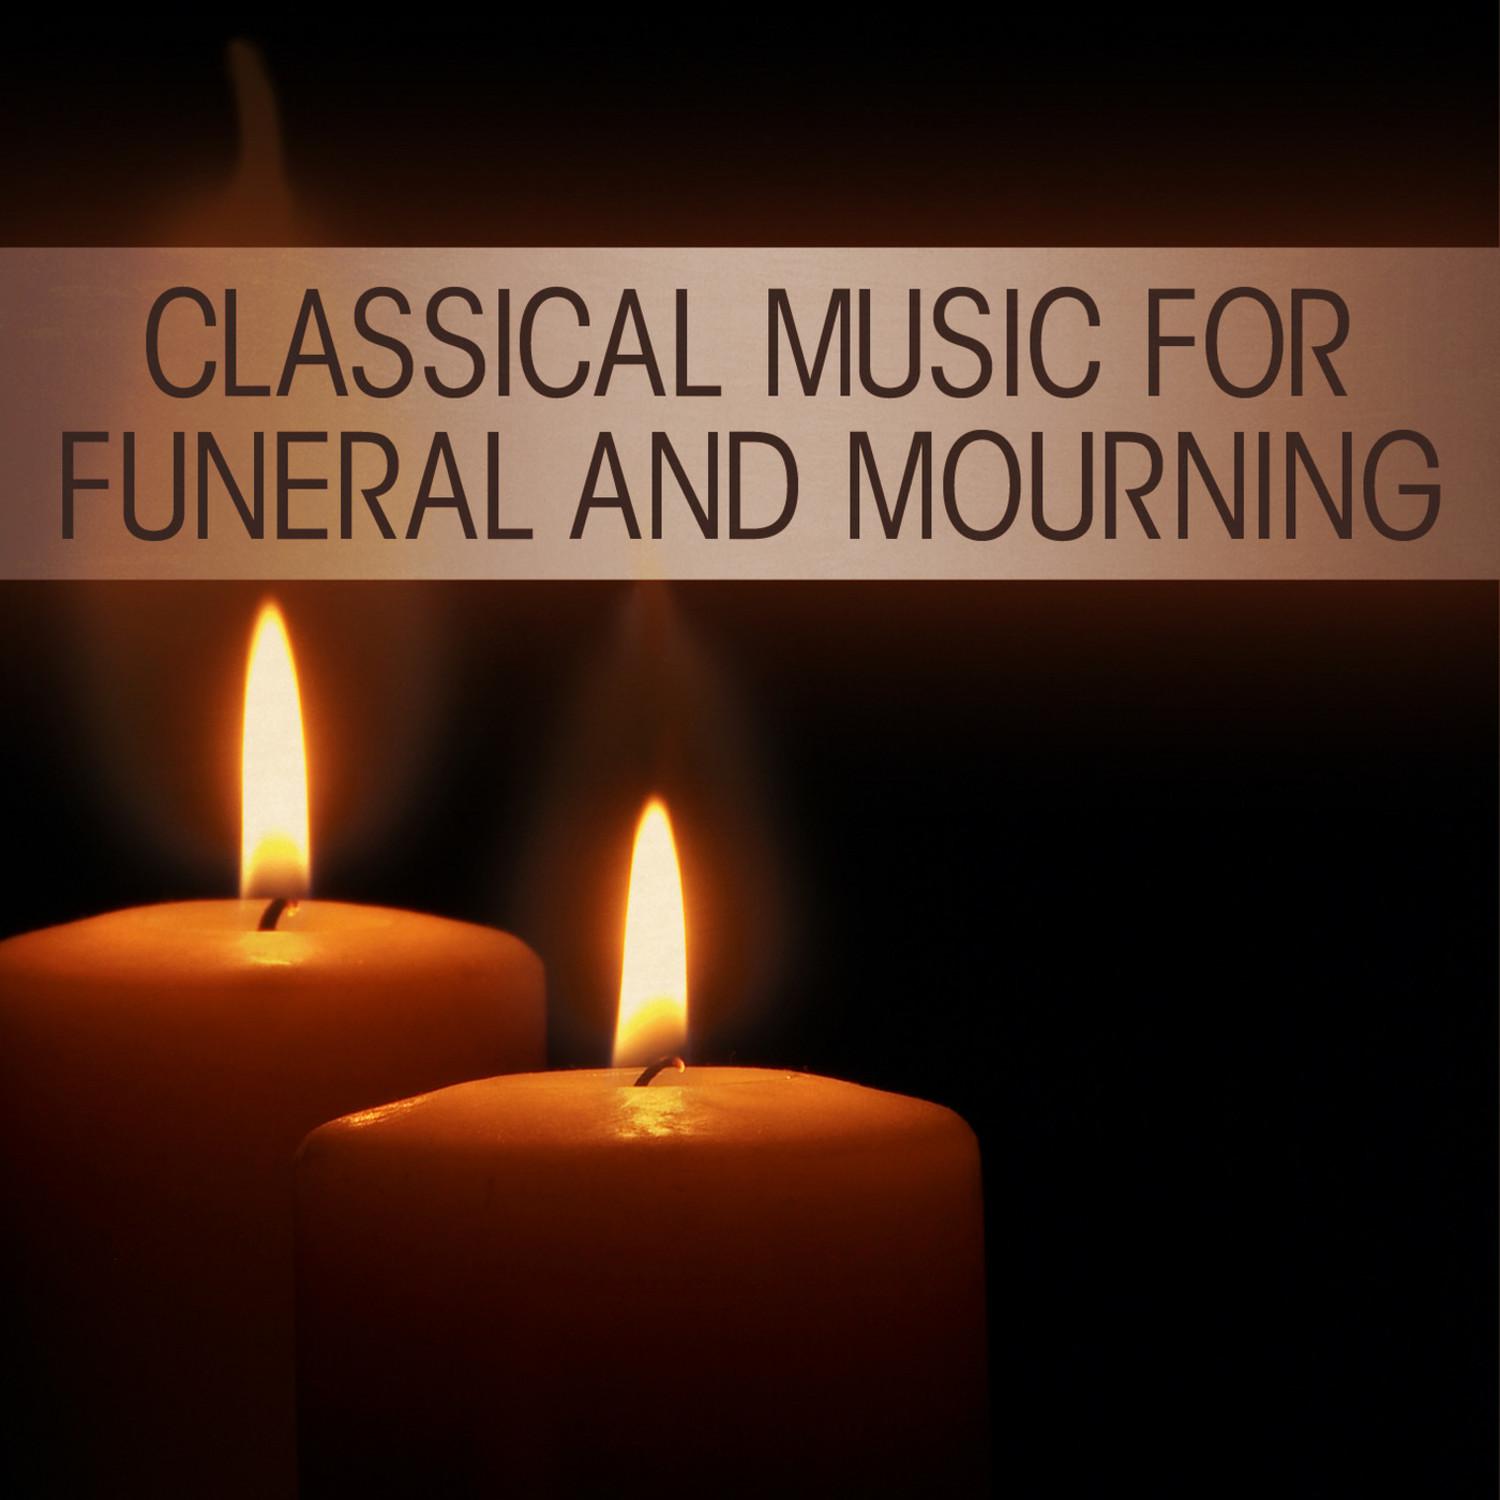 Songs Without Words, Book 5, Op. 62: No. 27 in E Minor - Funeral March